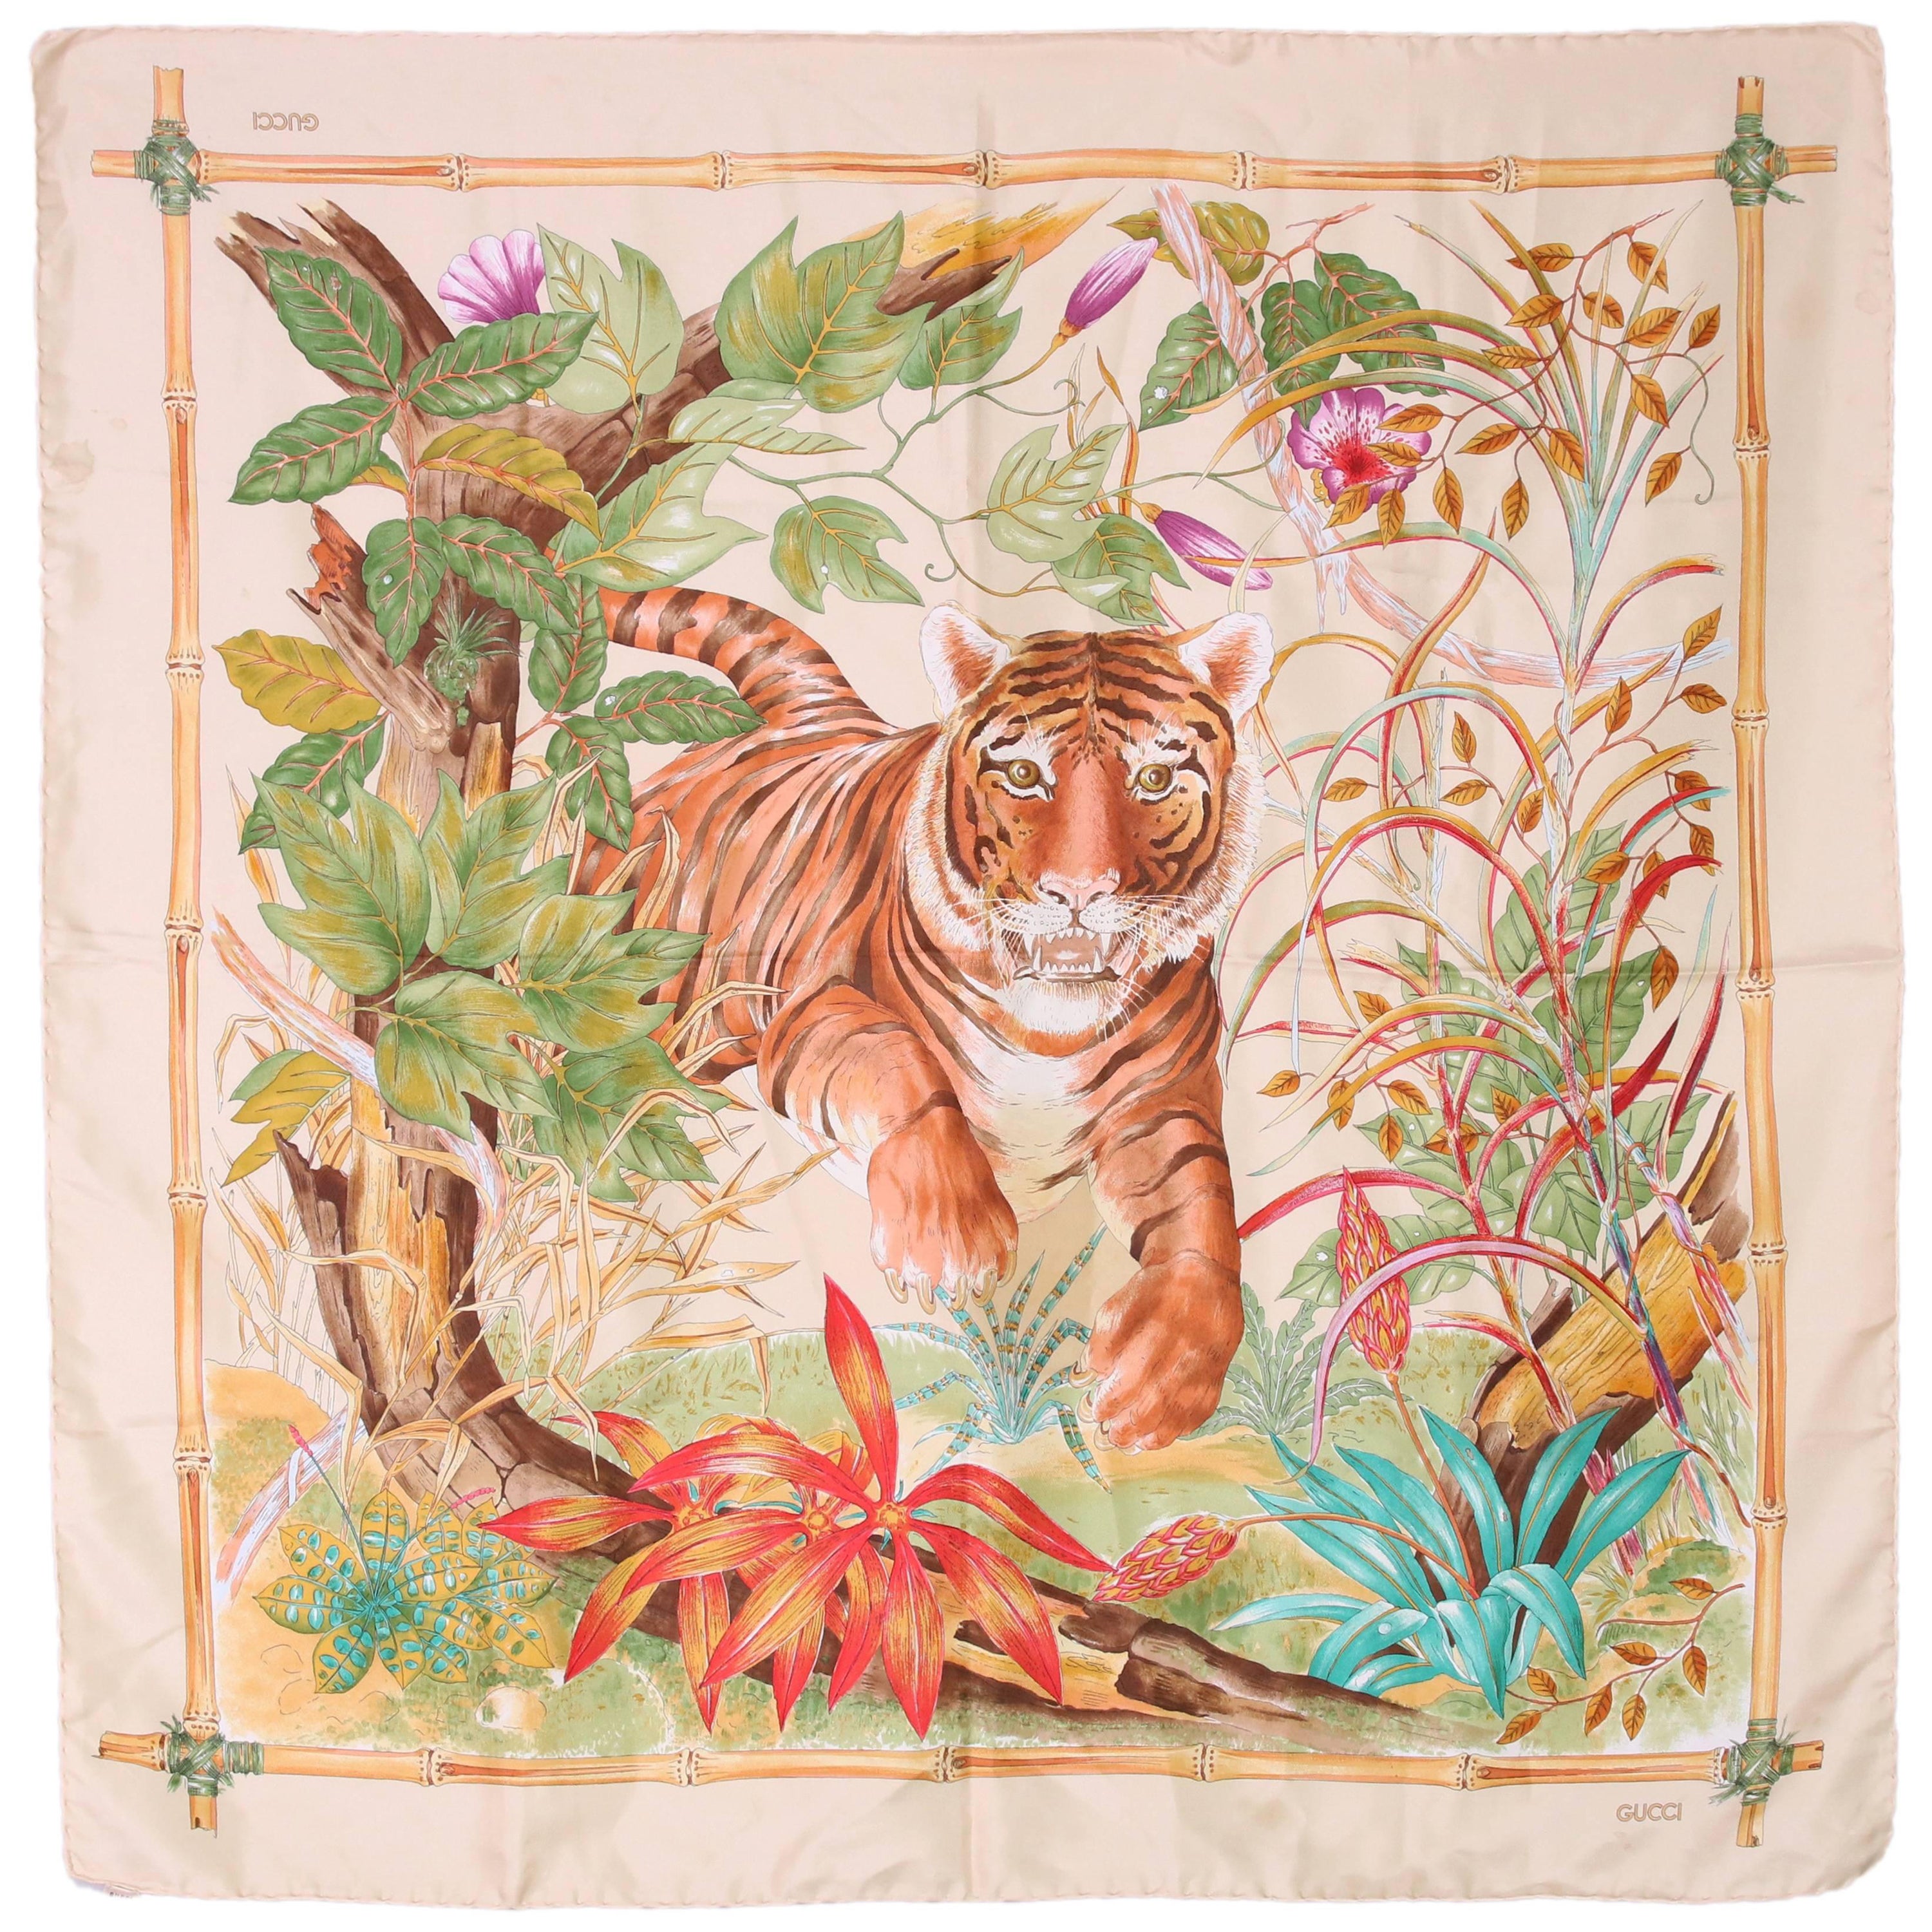 1970's Gucci Silk Scarf Featuring a Tiger Against A Jungle Background For Sale